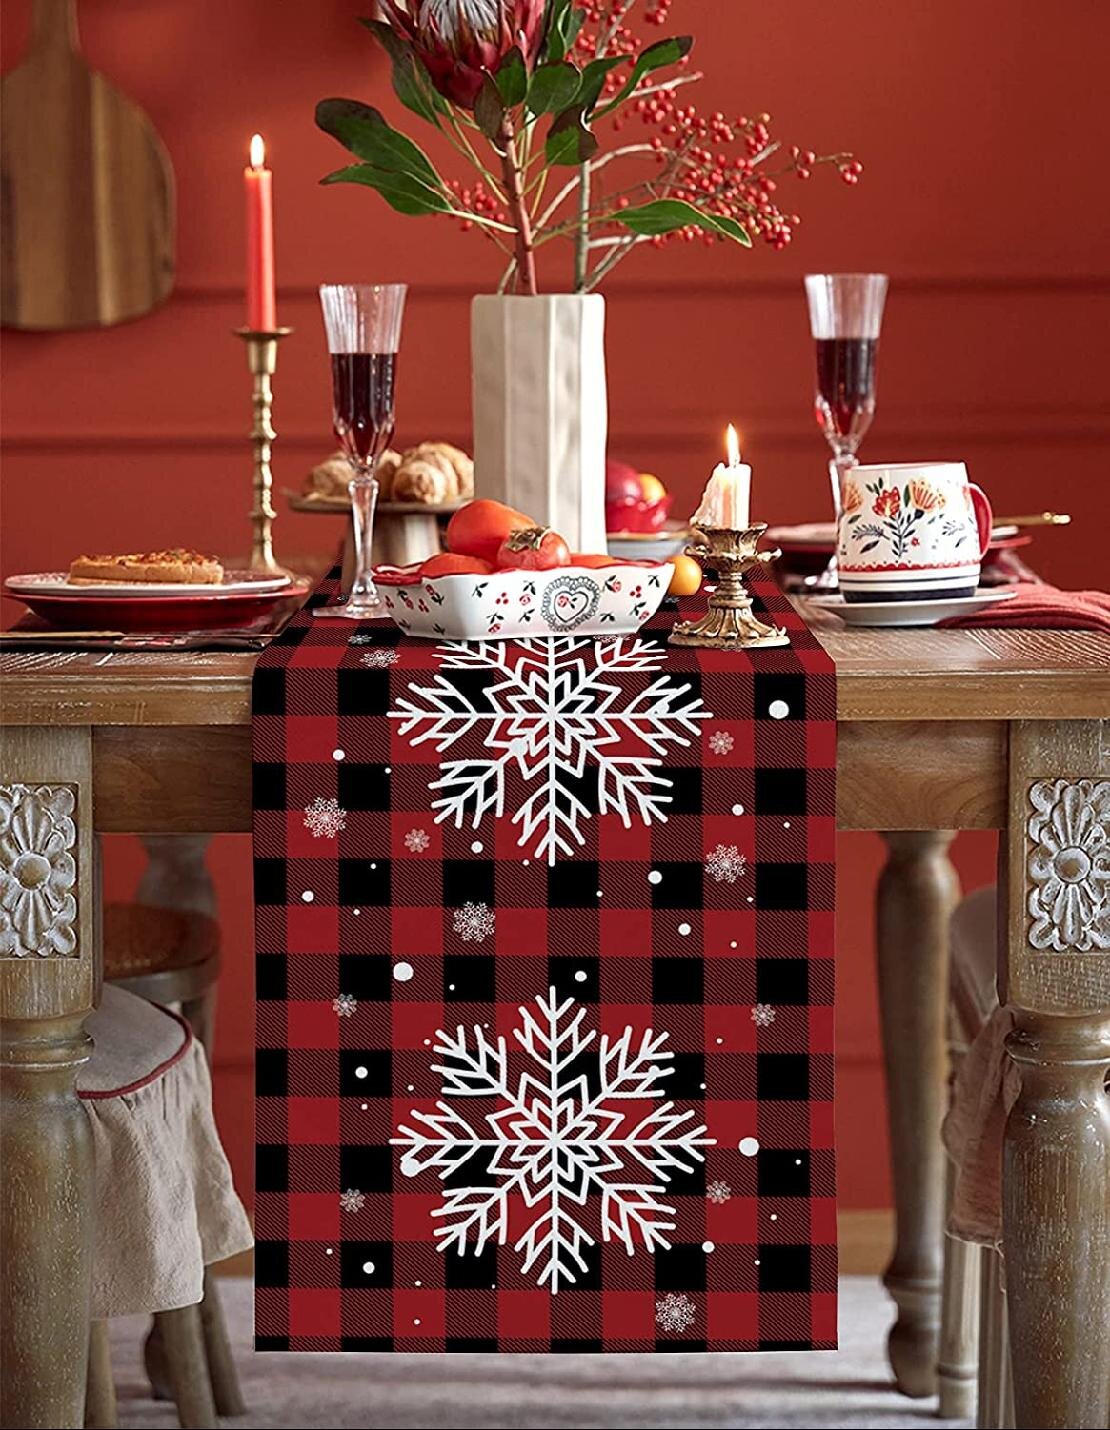 Christmas Table Runner-Cotton Linen-Let it Snow Dinner Scarf Décor,Long 90 Inch Holiday Winter snowflake Dresser Scarves,Farmhouse Xmas Kitchen Coffee/Dining Home Living Room Tablerunner,Red white